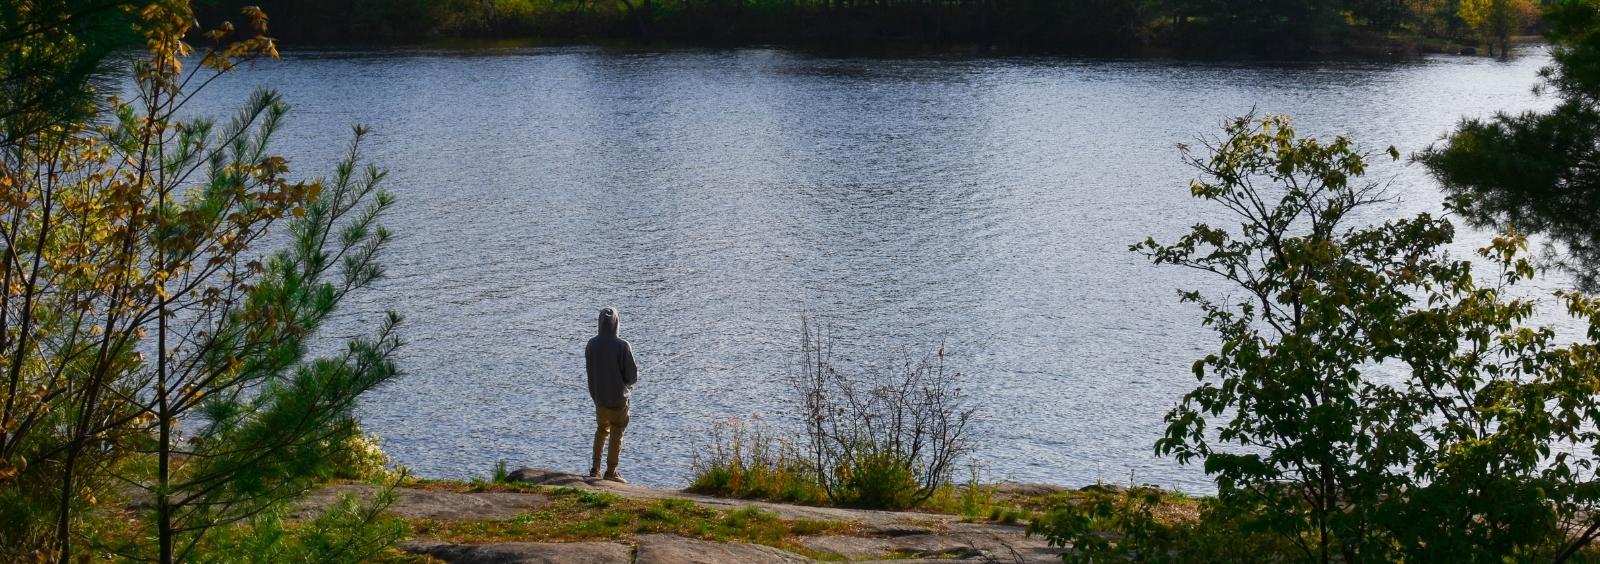 Photo from the Petawawa Point of a man fishing of a rock.